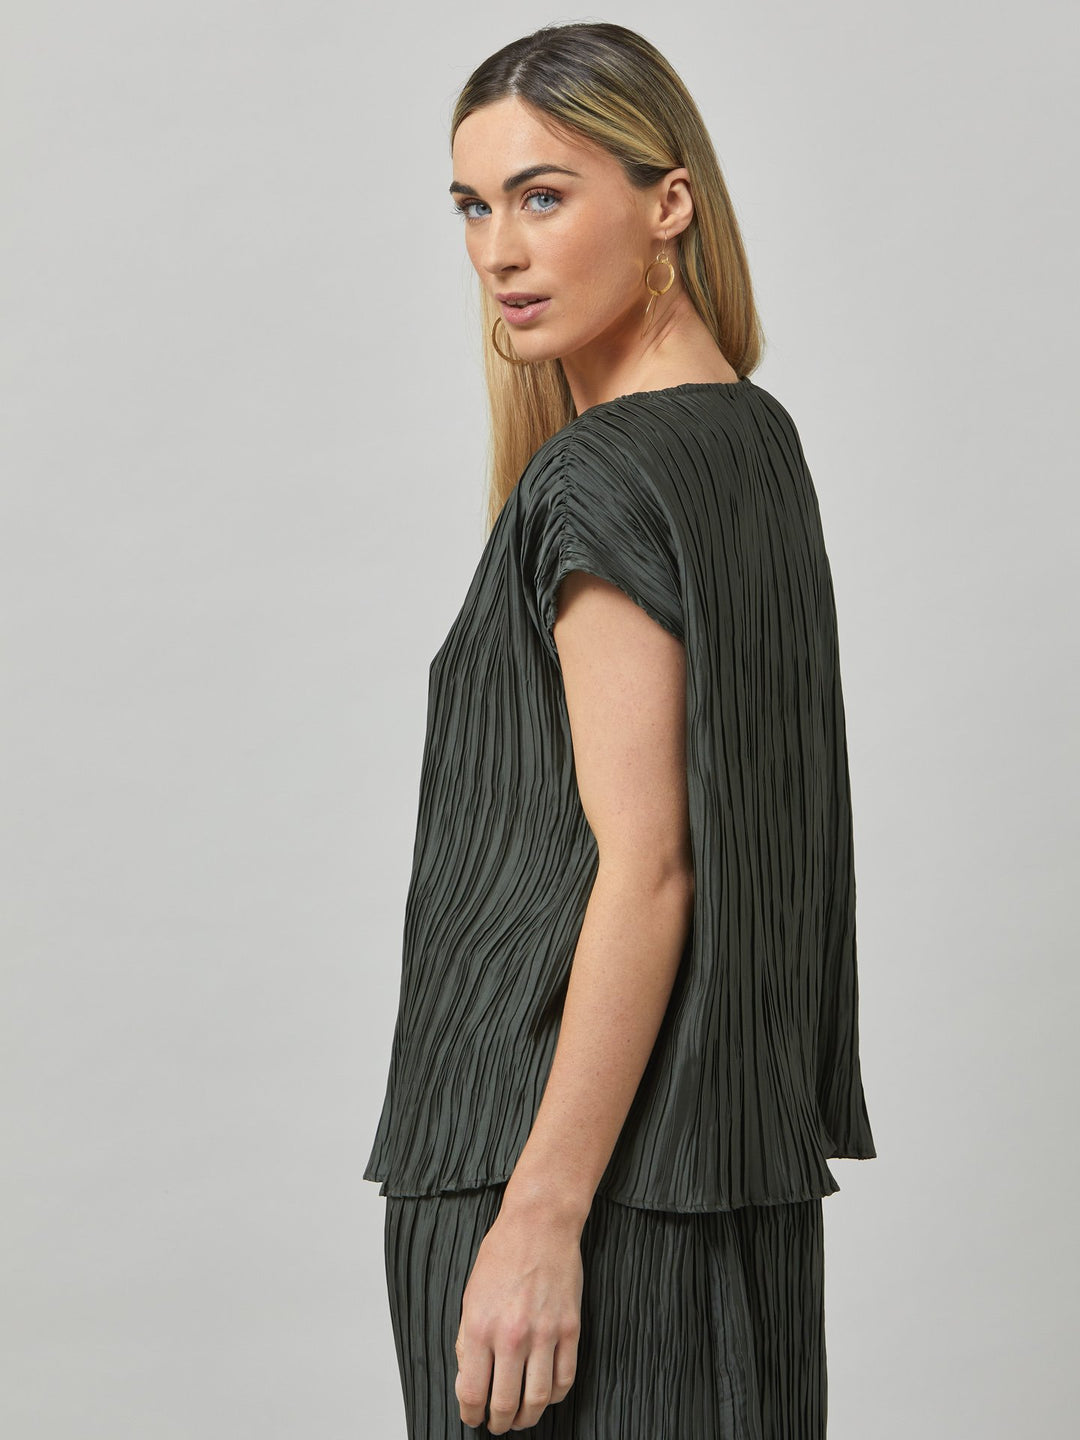 Lucy, a shell top redefined in a polished olive pleated fabric. A simple wardrobe essential, the perfect foil for the matching roz olive pleated skirt. This hardworking, travel-friendly fabric will inject some seriously easy-going cool into your everyday.